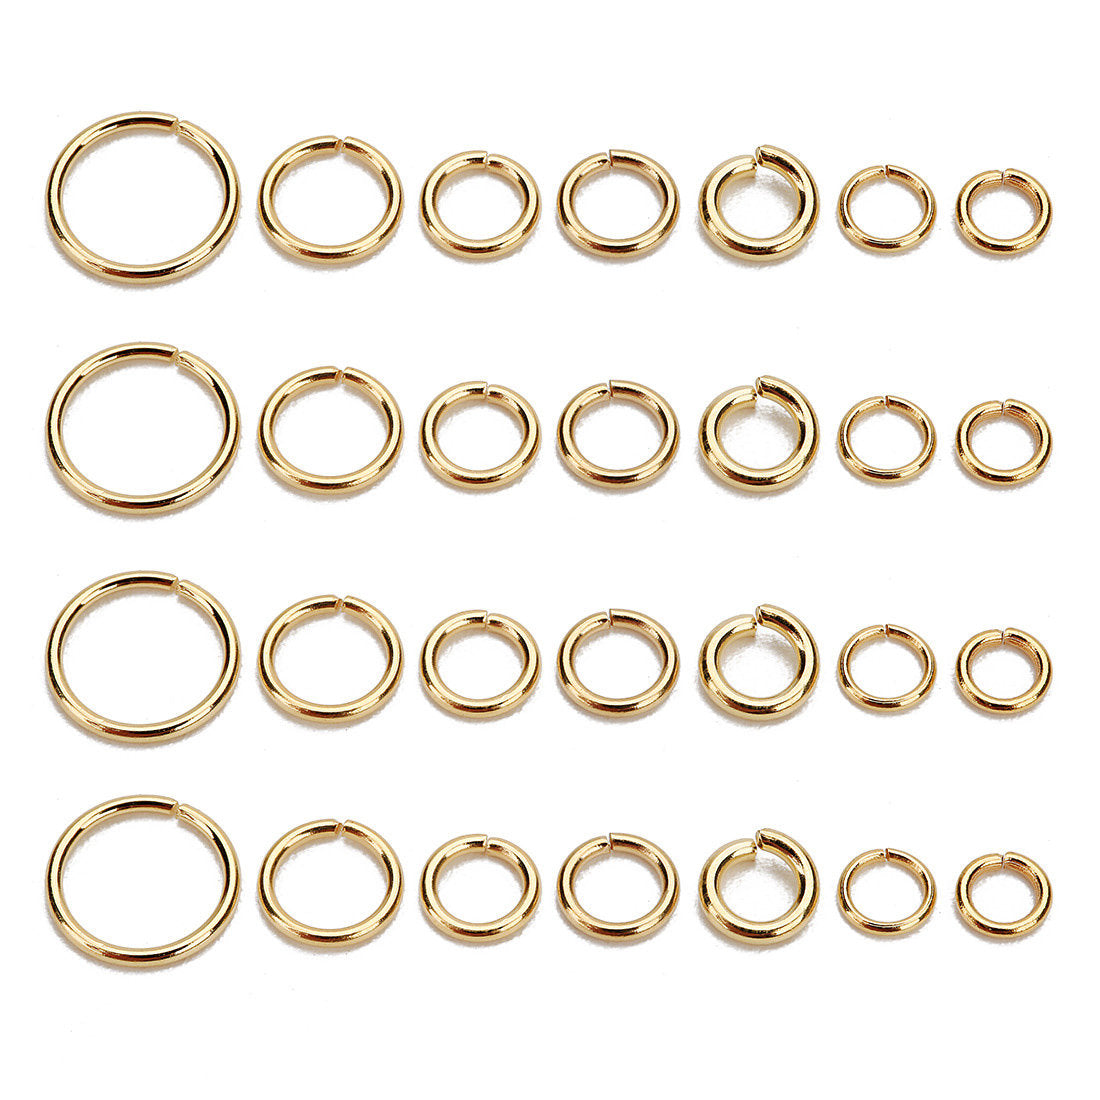 Gold plated stainless steel jump rings 4, 5 or 8mm - 100pcs